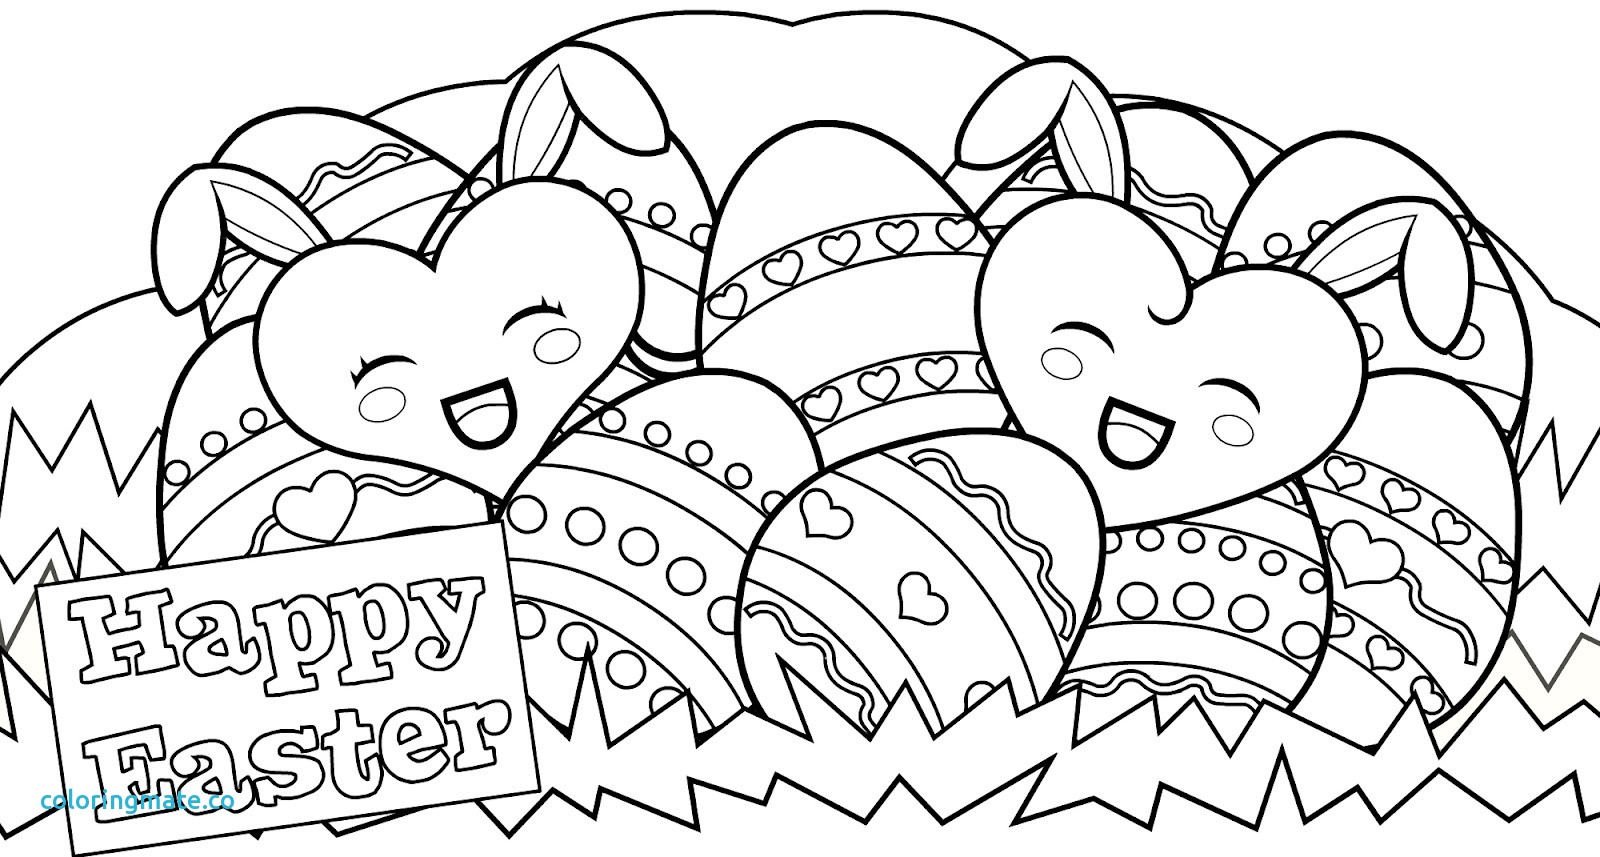 spring coloring pages easter